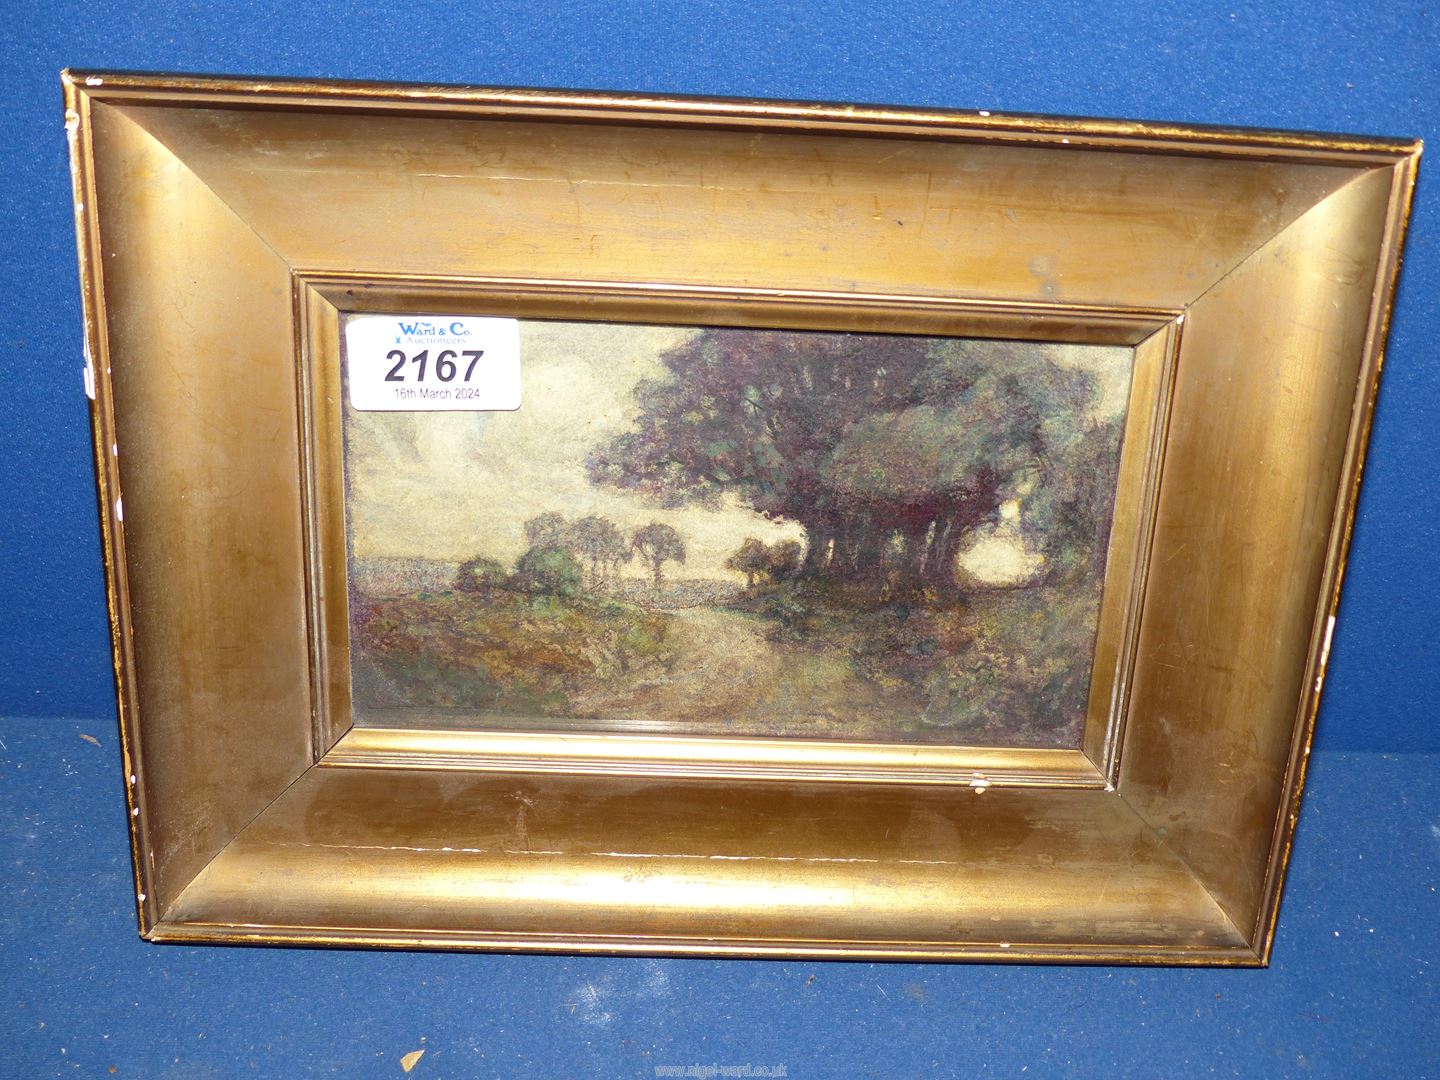 A 19th century Watercolour in original frame, depicting trees and a landscape, - Image 4 of 4